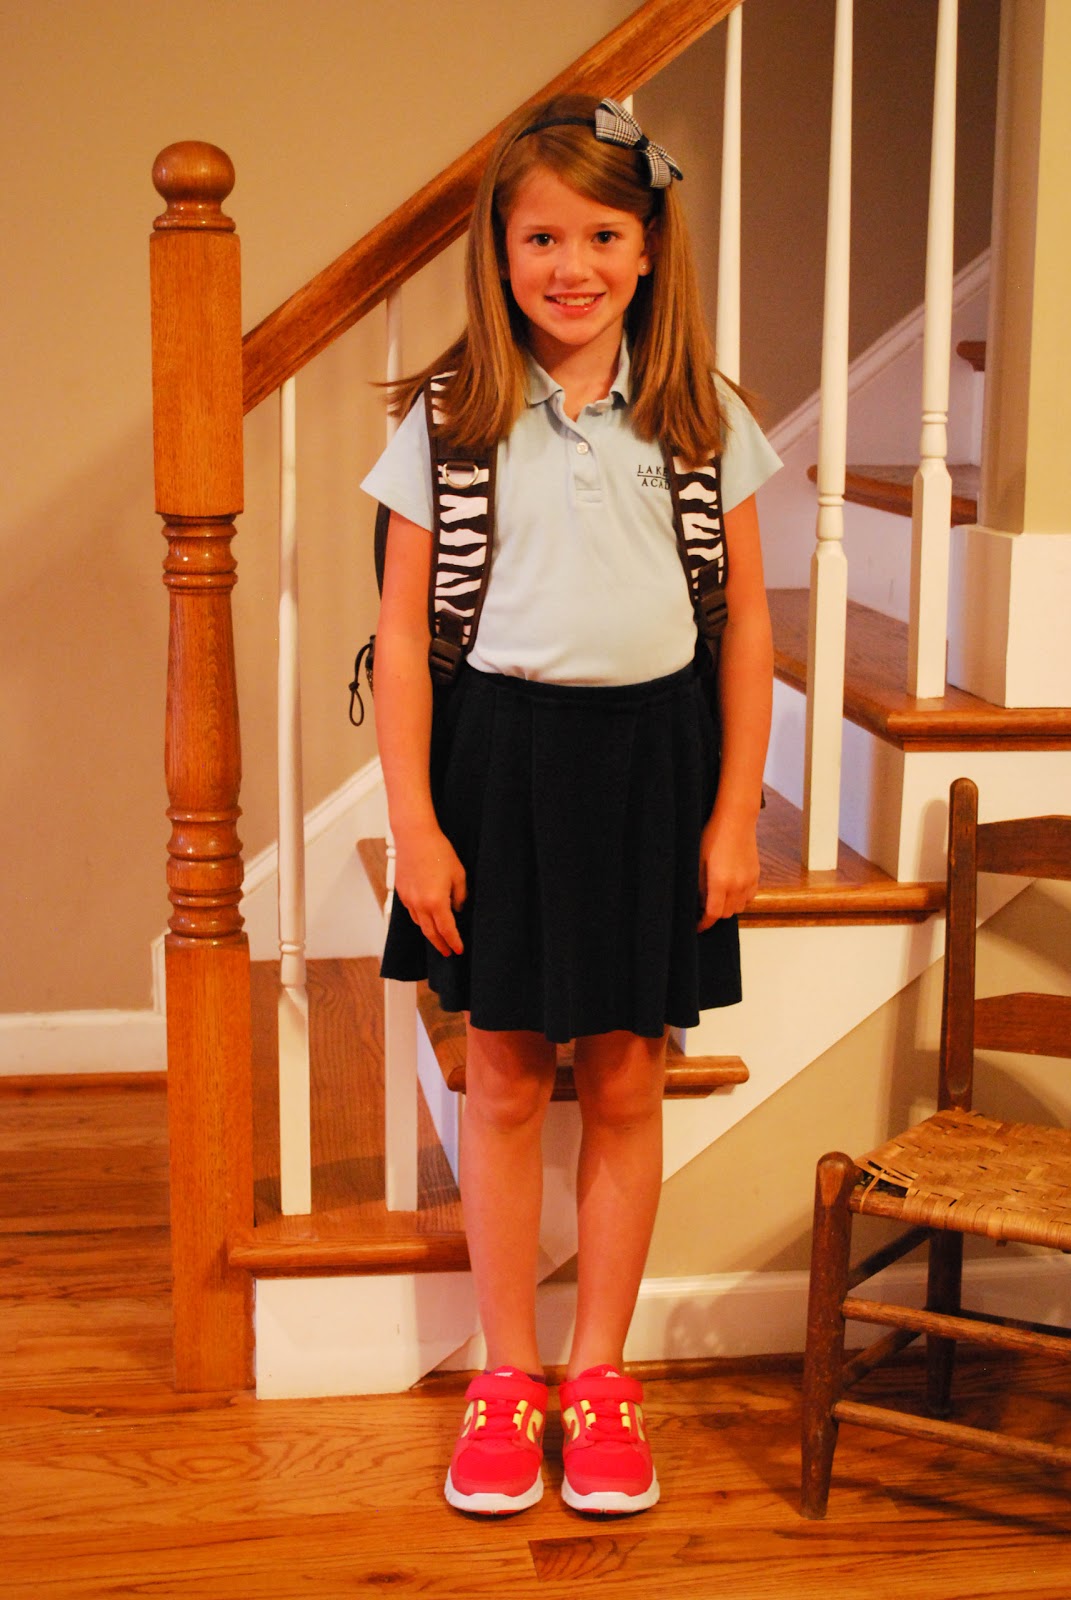 shelly-s-soapbox-back-to-school-first-day-of-3rd-grade